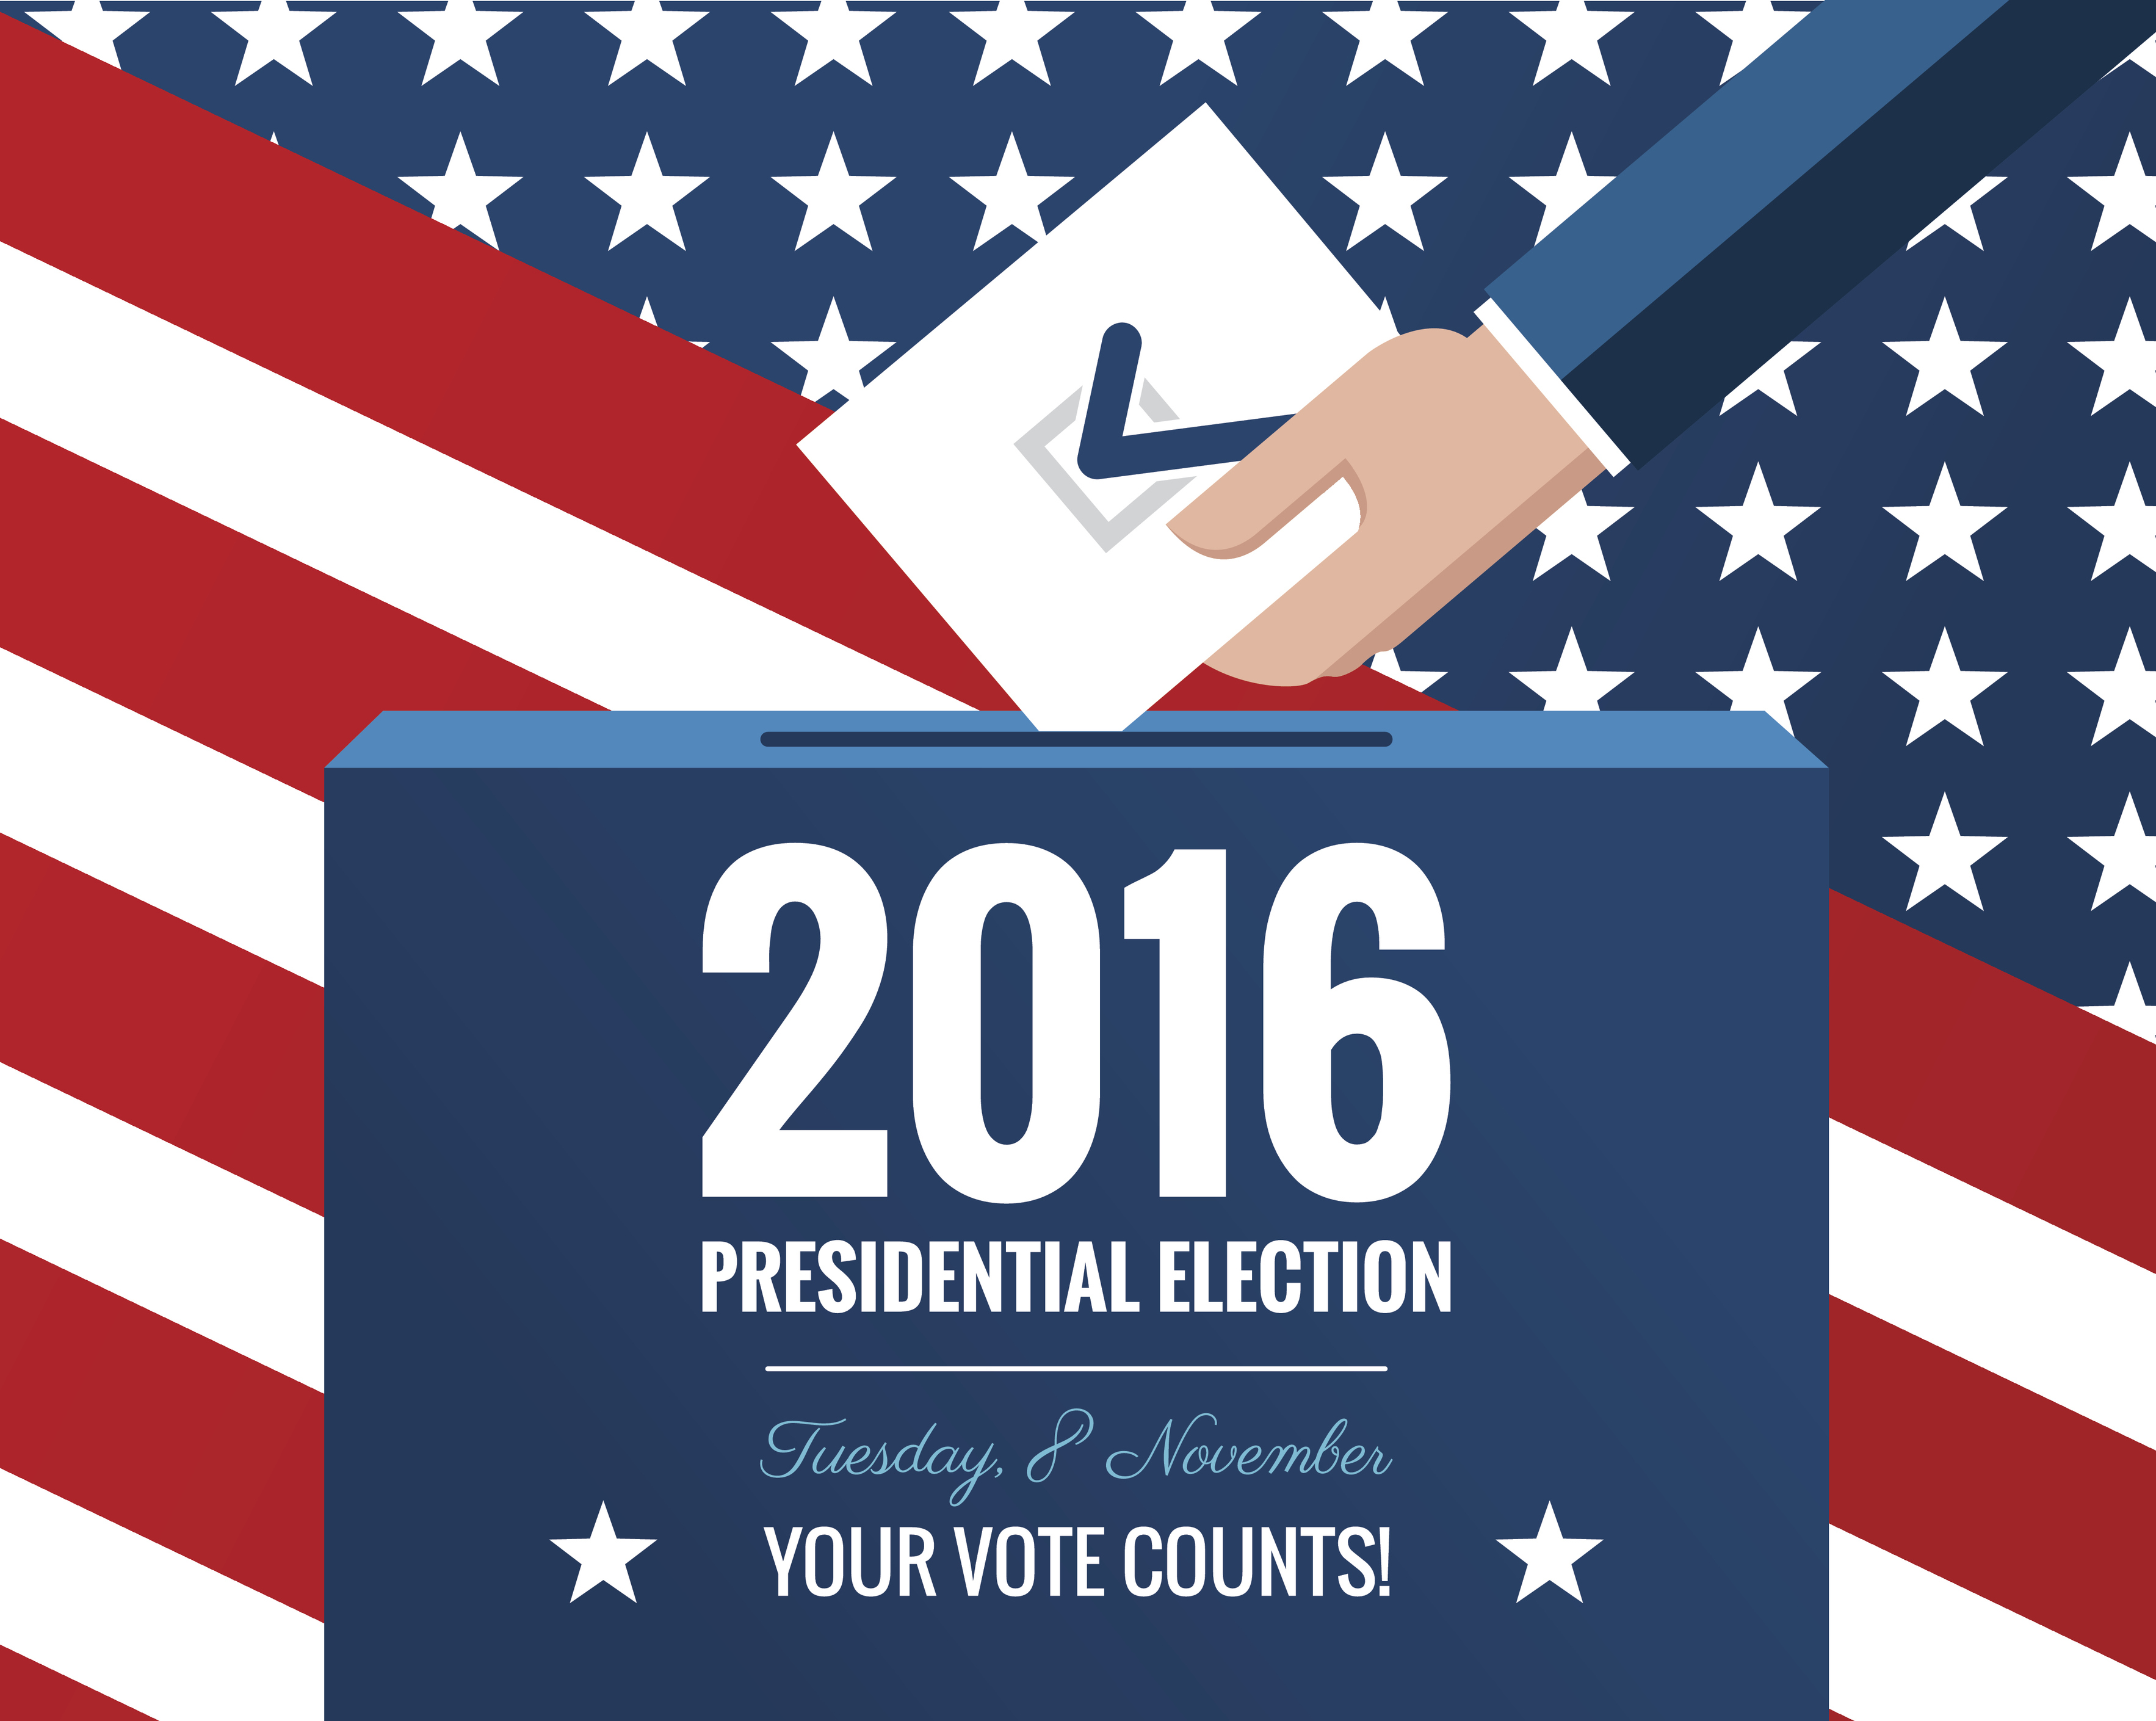 Presidential election banner background. US Presidential election 2016. Hand putting voting paper in the ballot box with american flag on background.  Flat design, vector illustration.